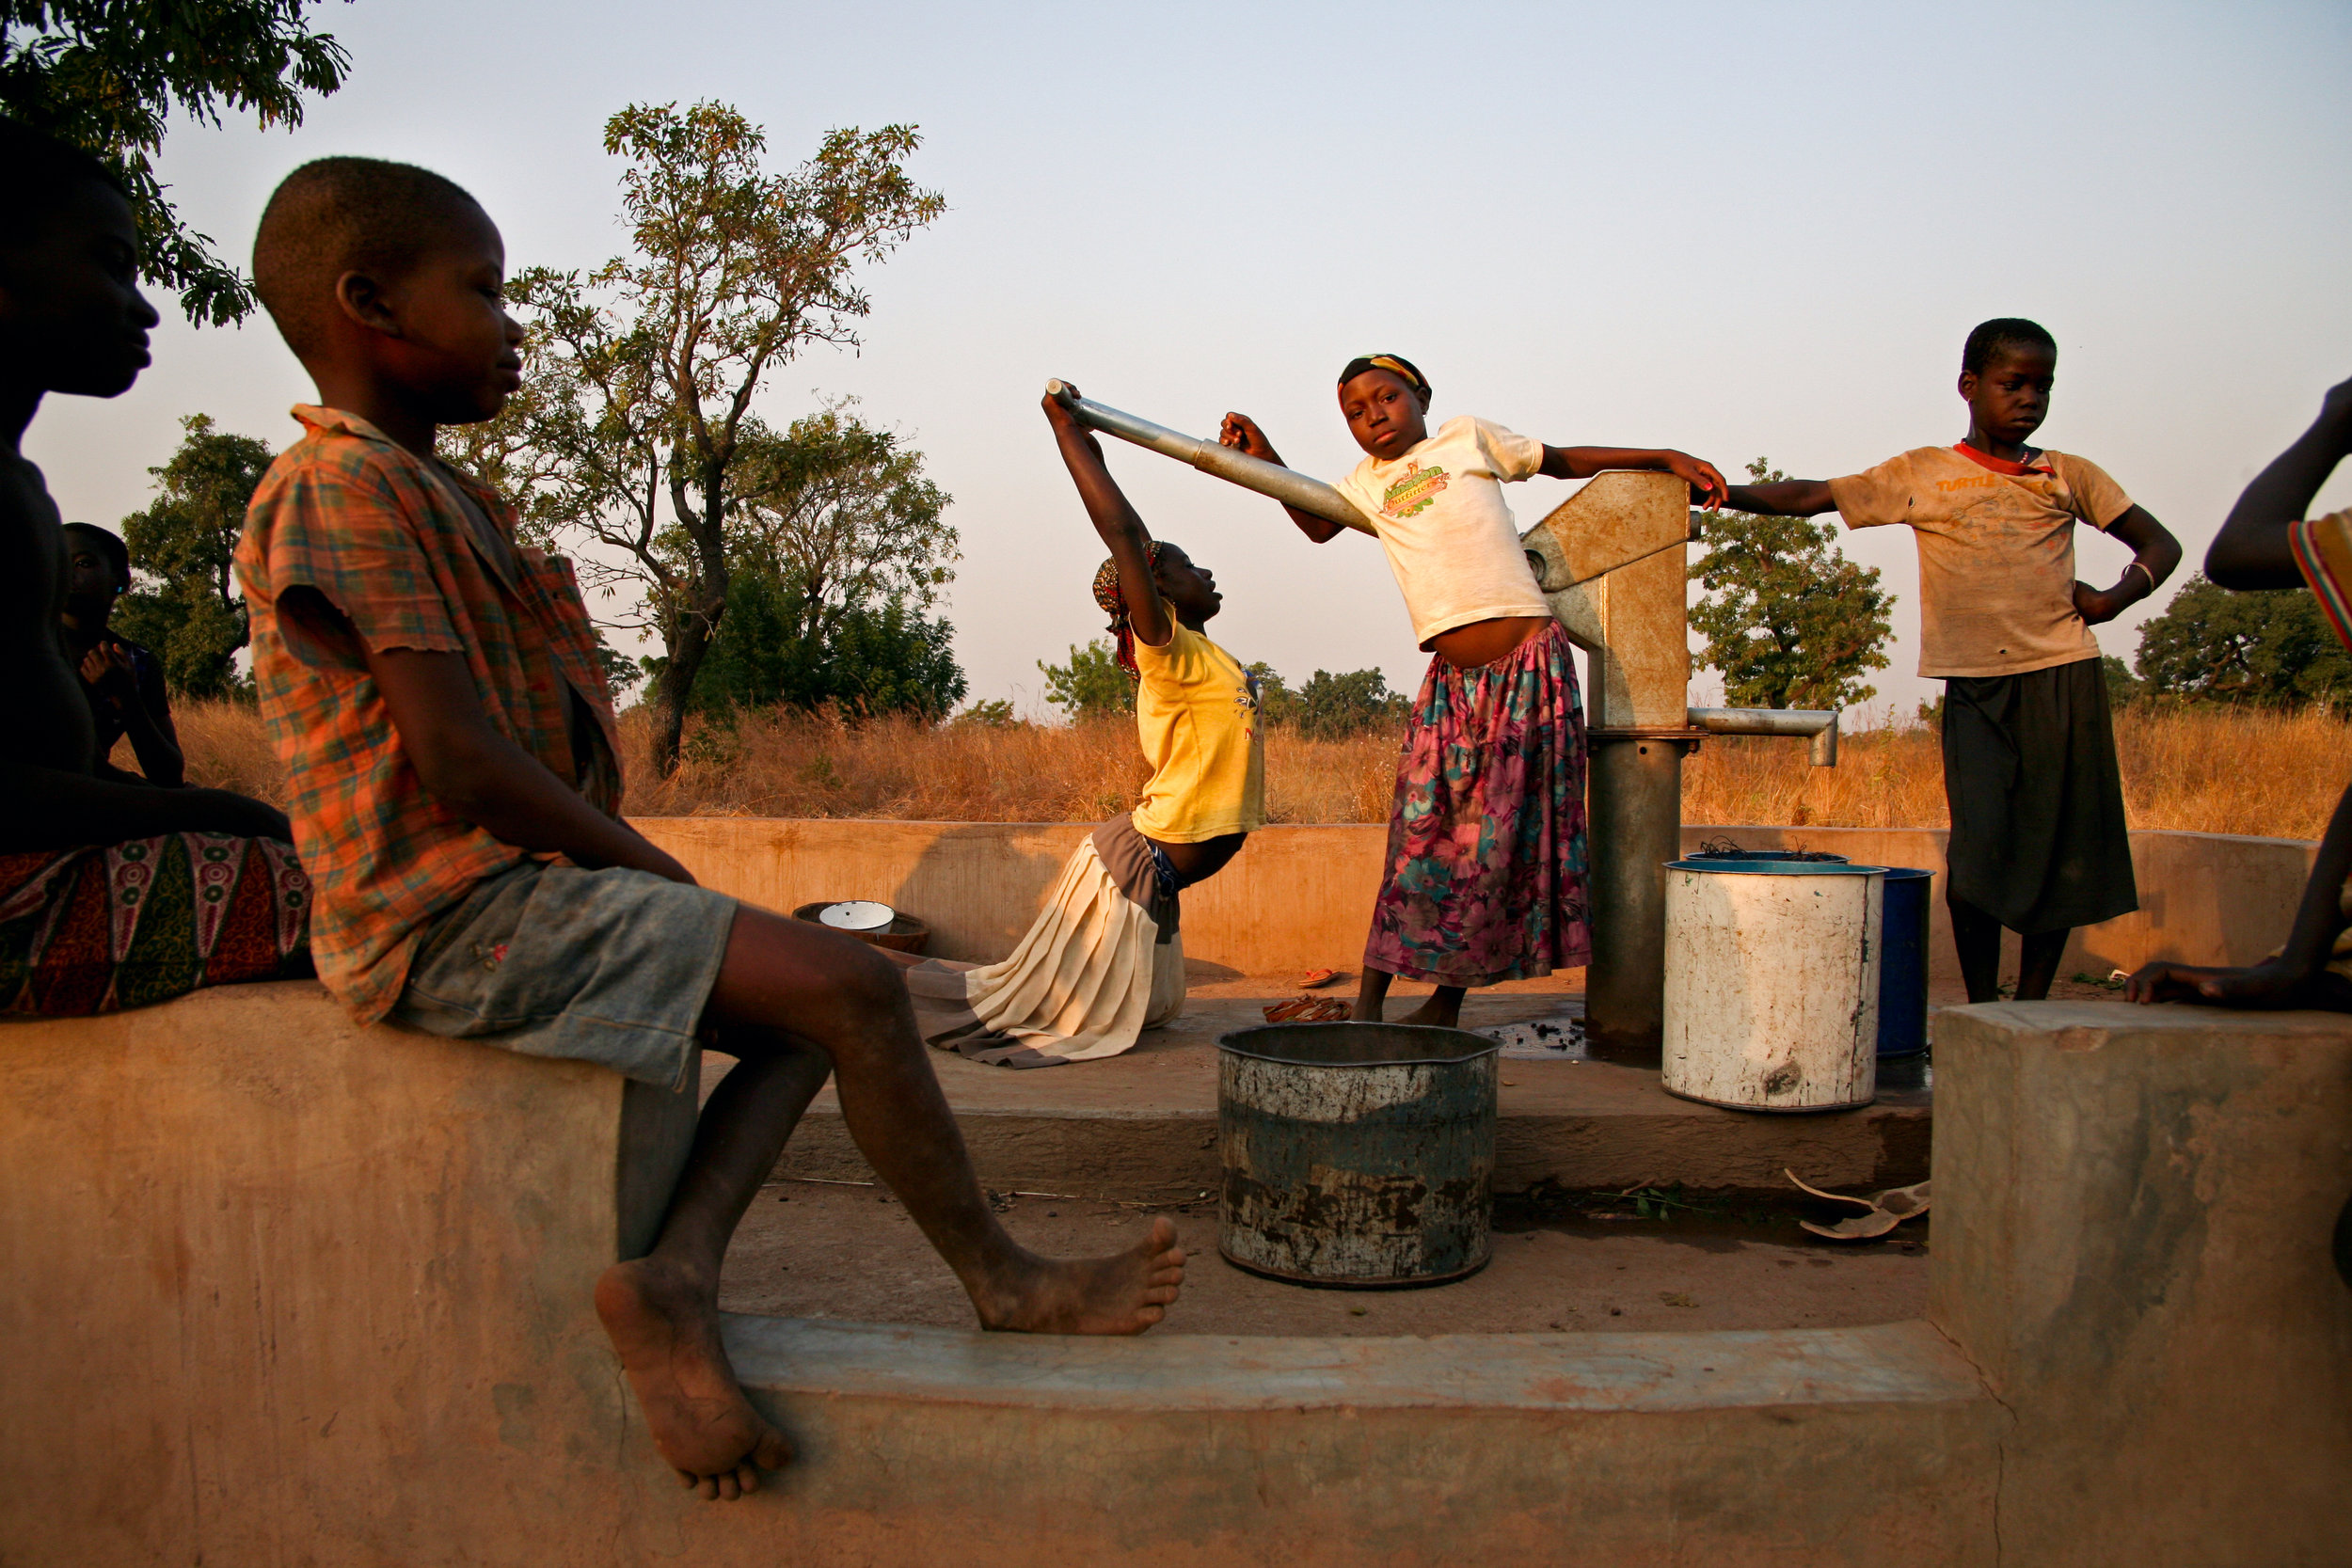  Children wait for water at a drilled borehole well in Wantugu, Ghana on Dec. 21, 2006. Several such wells have been installed as an attempt to solve the village's severe water shortage, but the water table in the ground is too low, and sometimes it 